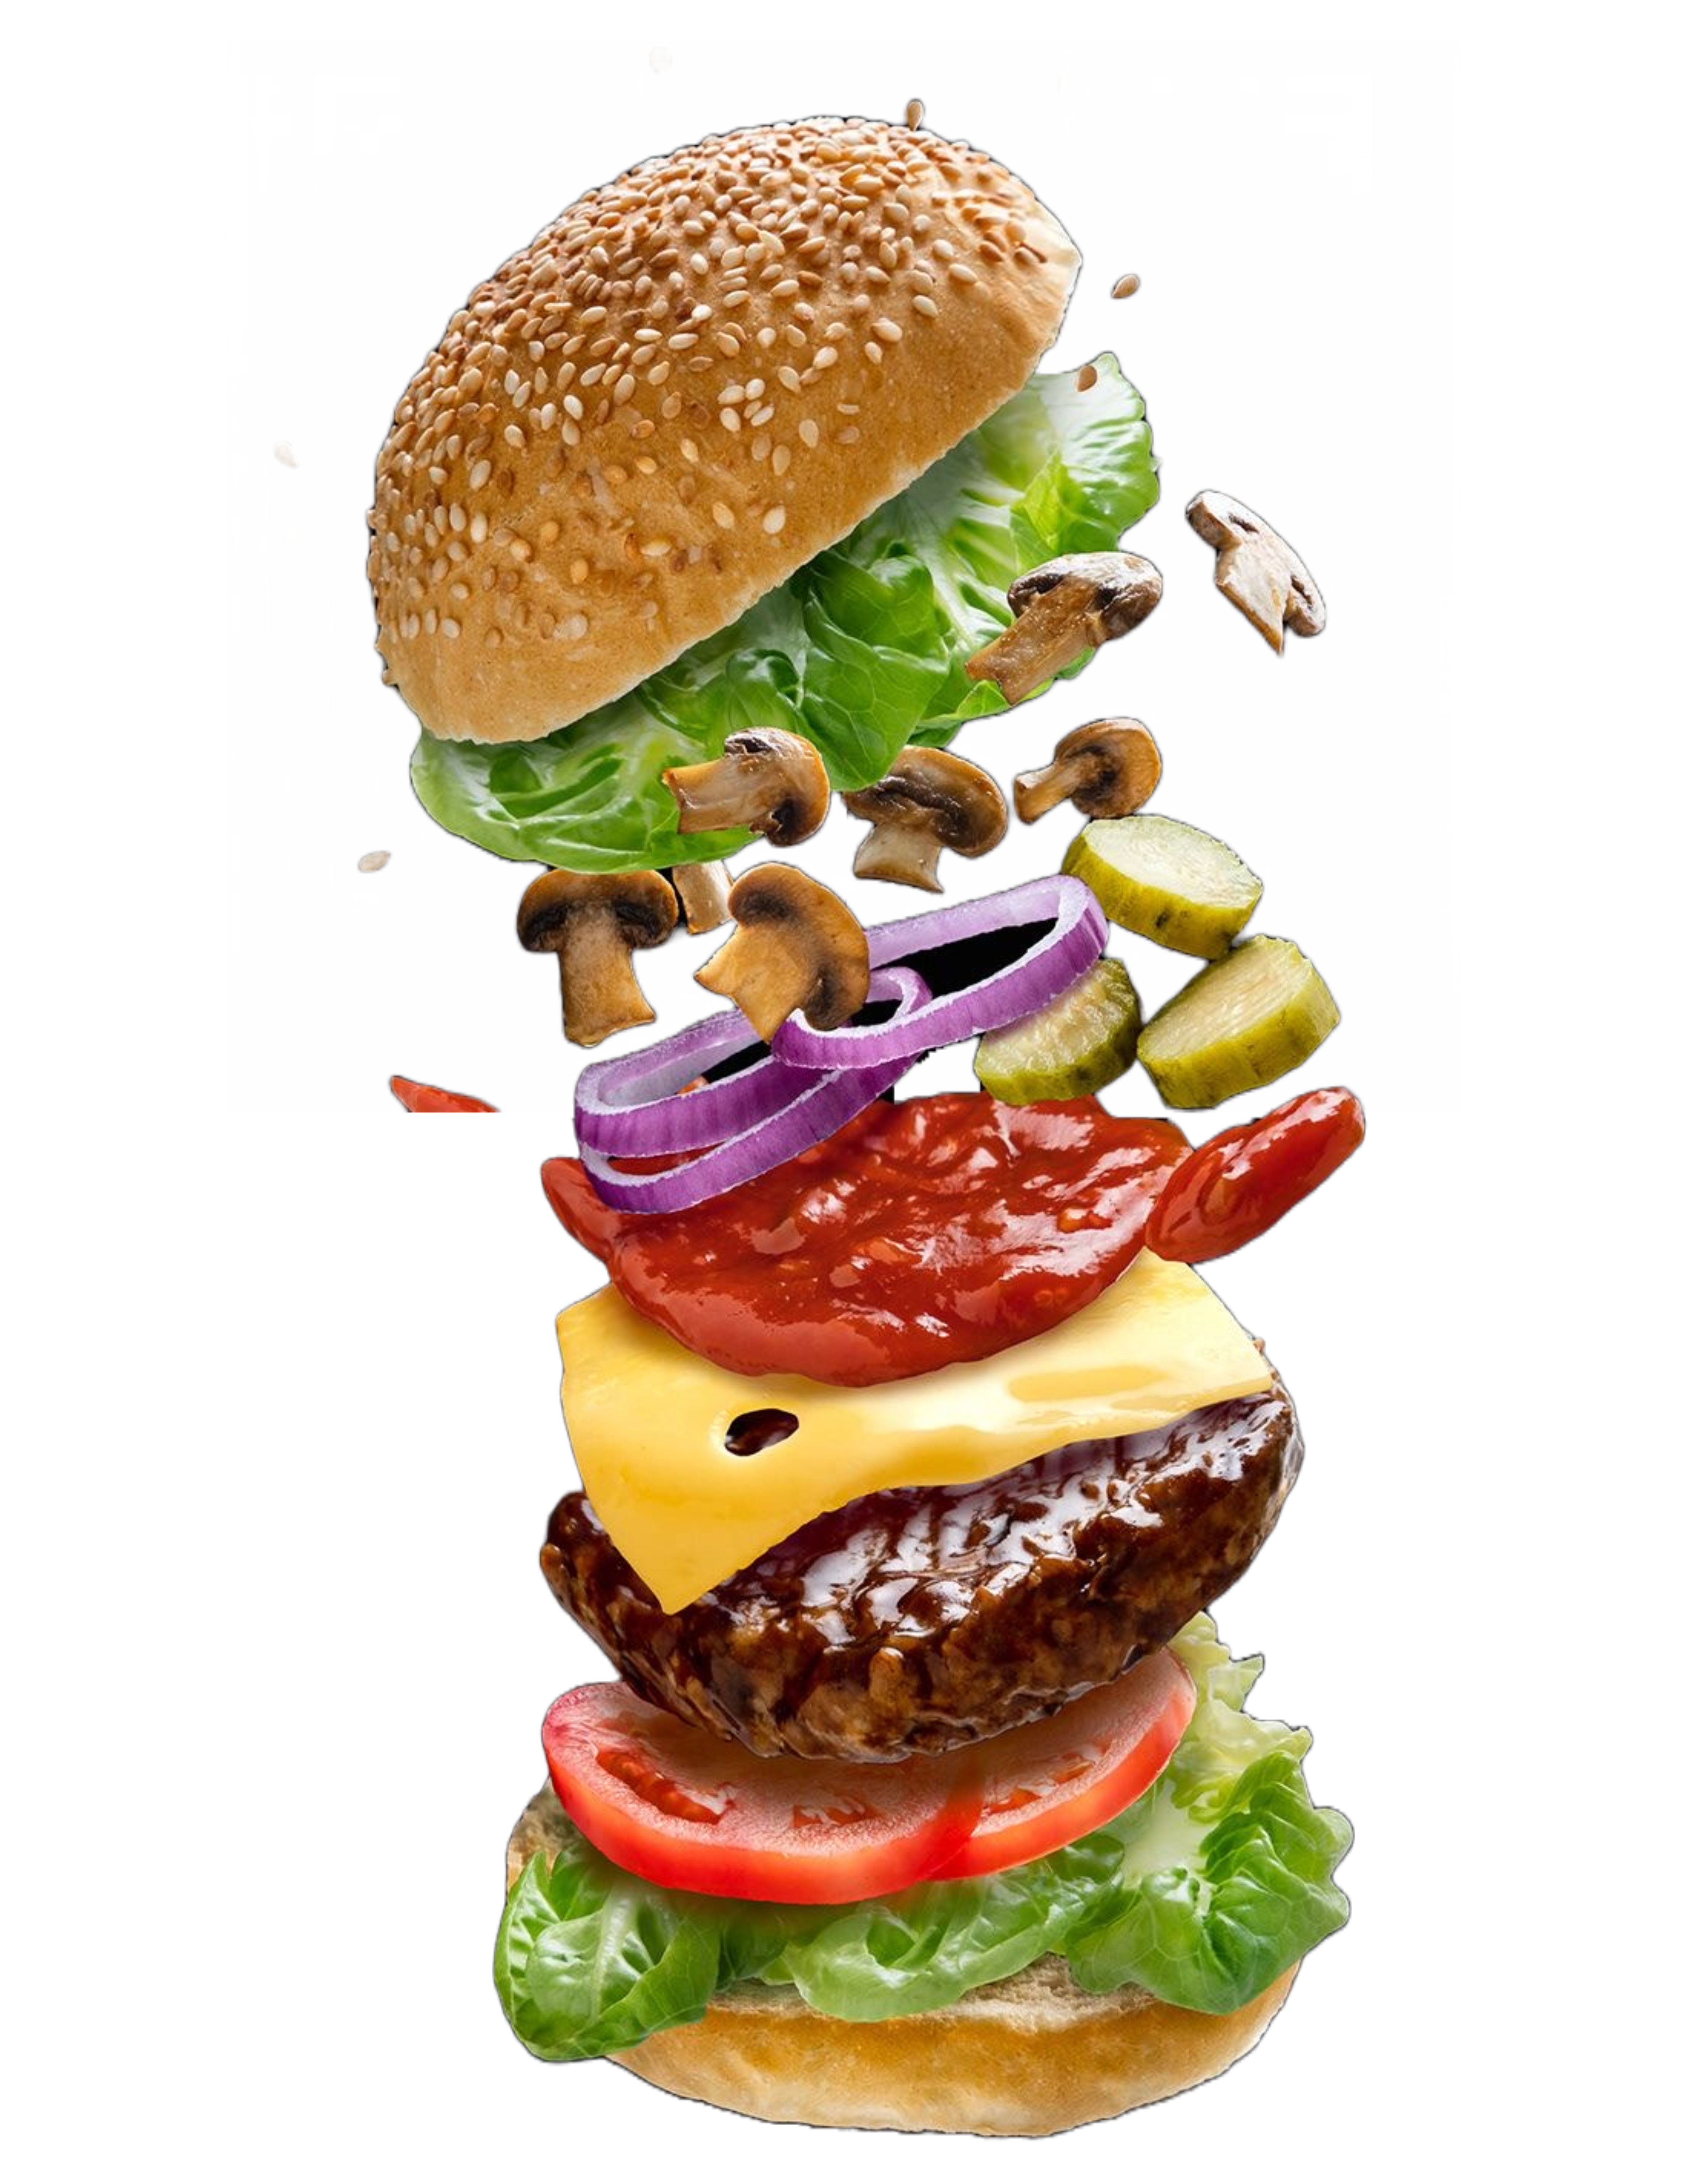 a graphic of a fully loaded burger showing all the layers